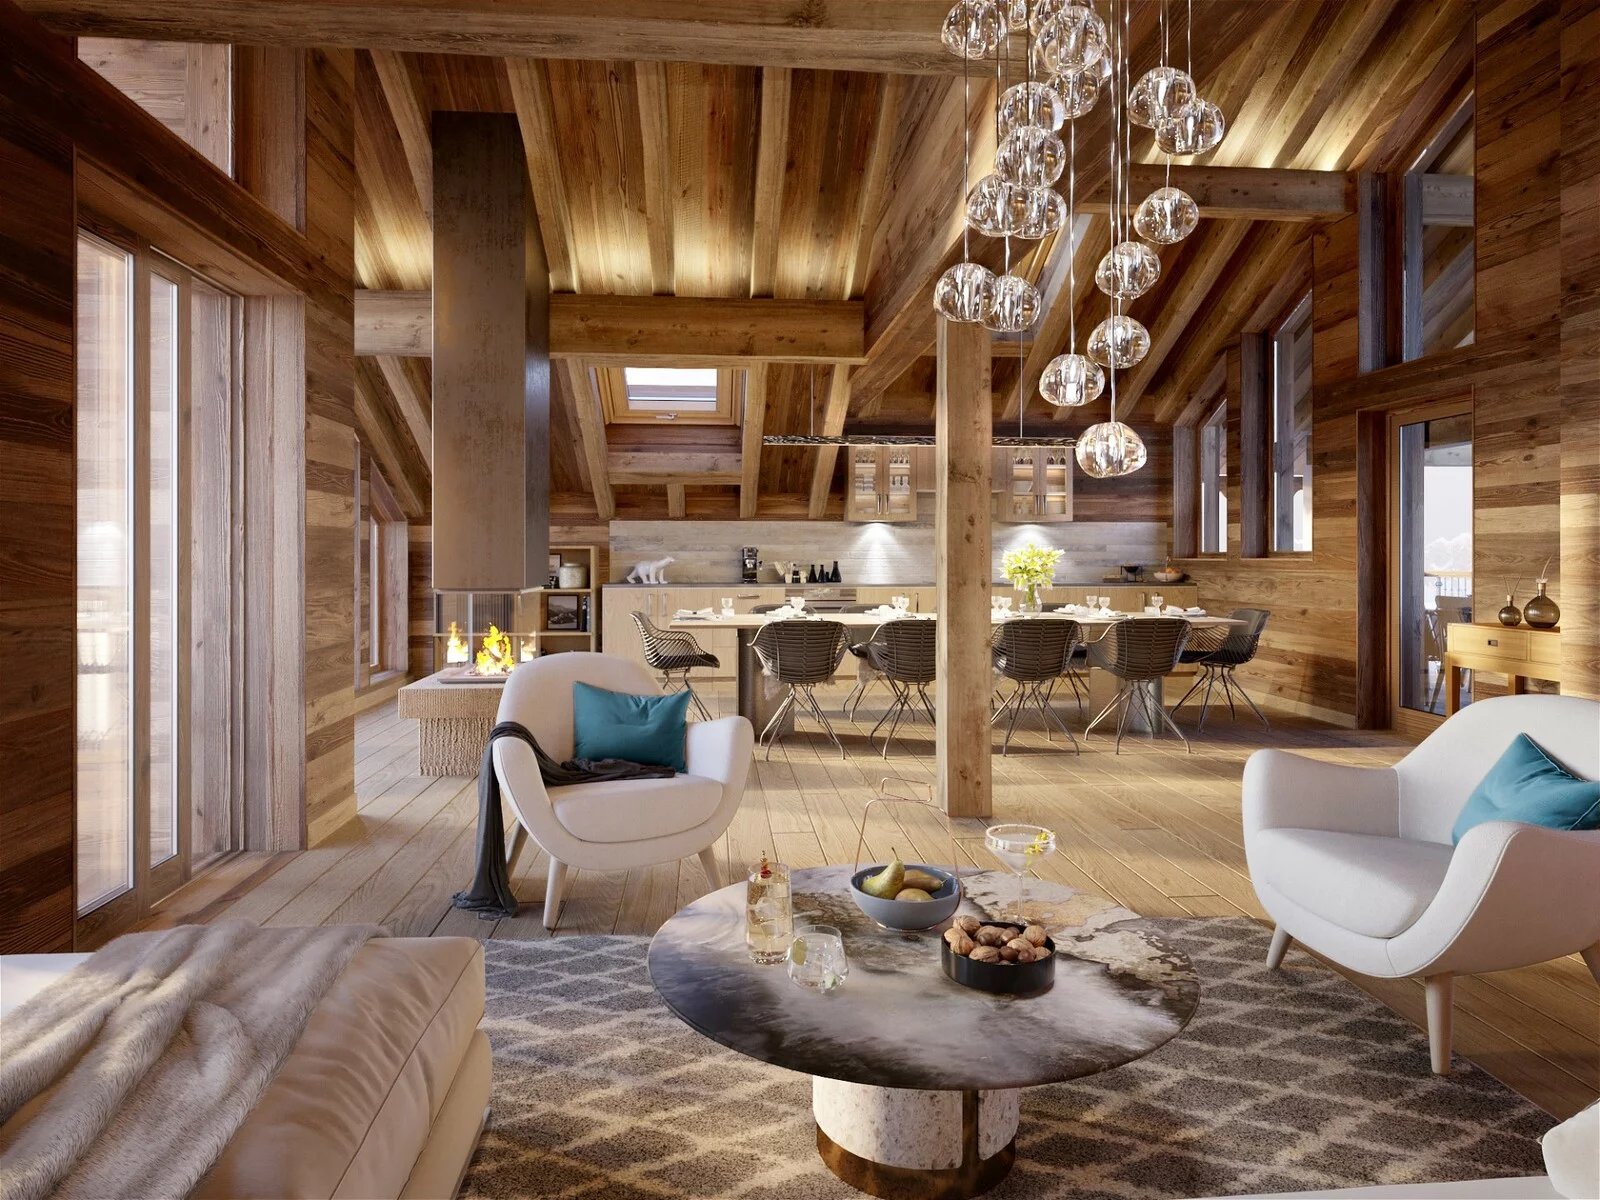 CHALET SLEEPS 10 IN AN INTIMATE HAMLET - WITH WELLNESS AREA